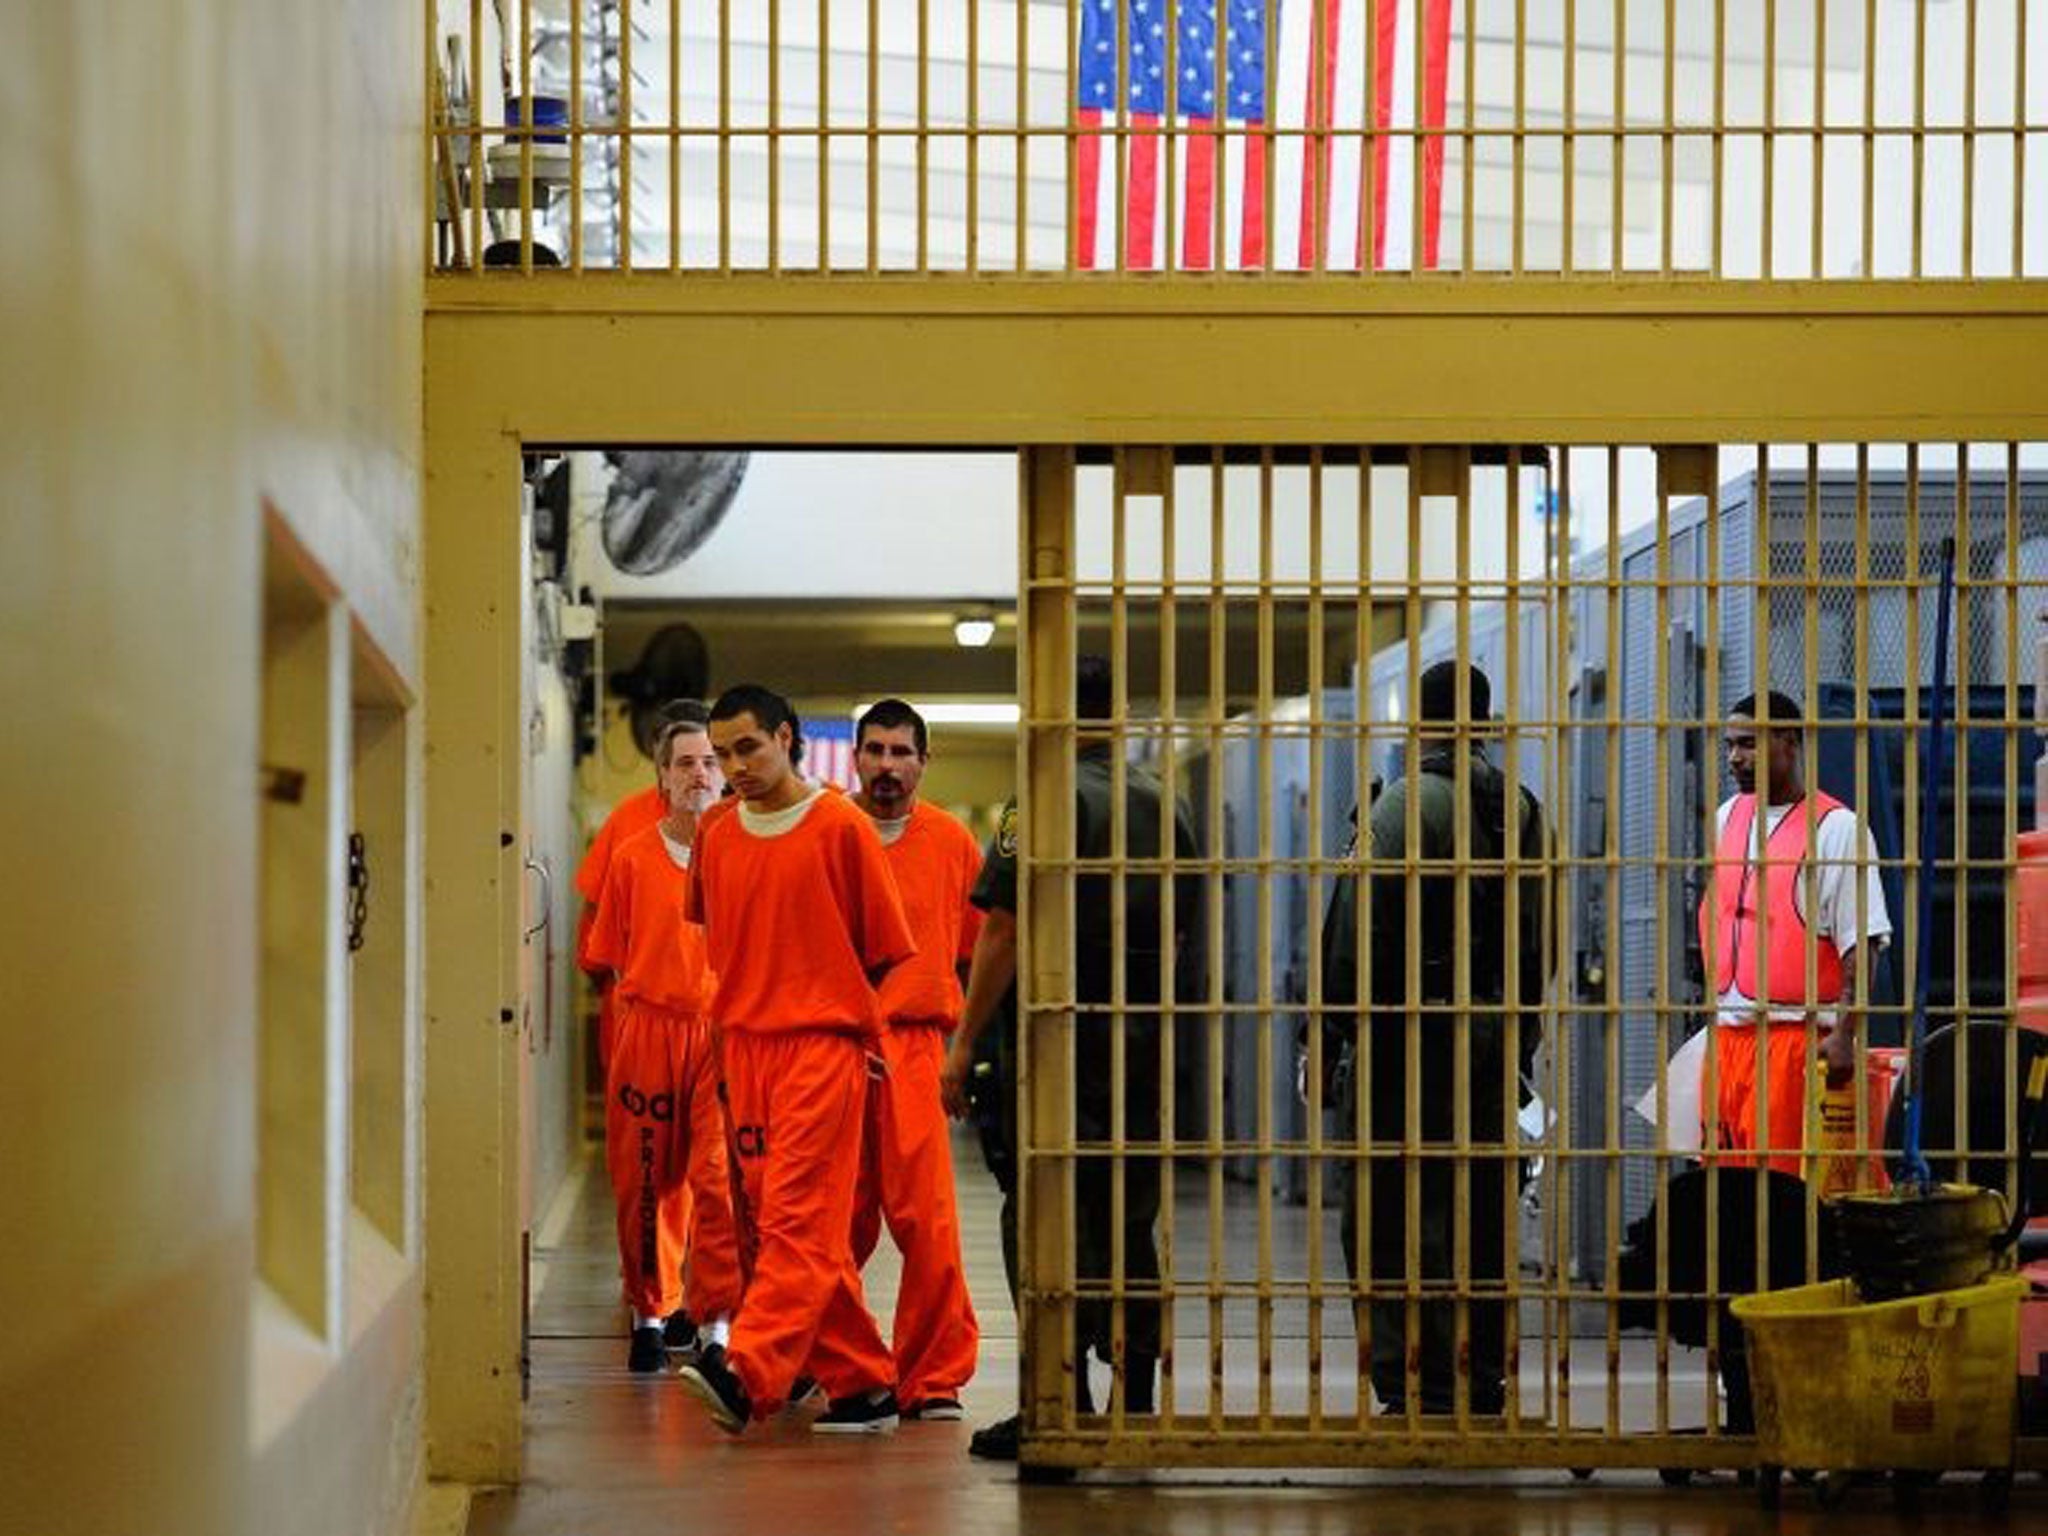 Inmates at Chino State Prison walk the hallway on December 10, 2010 in Chino, California.